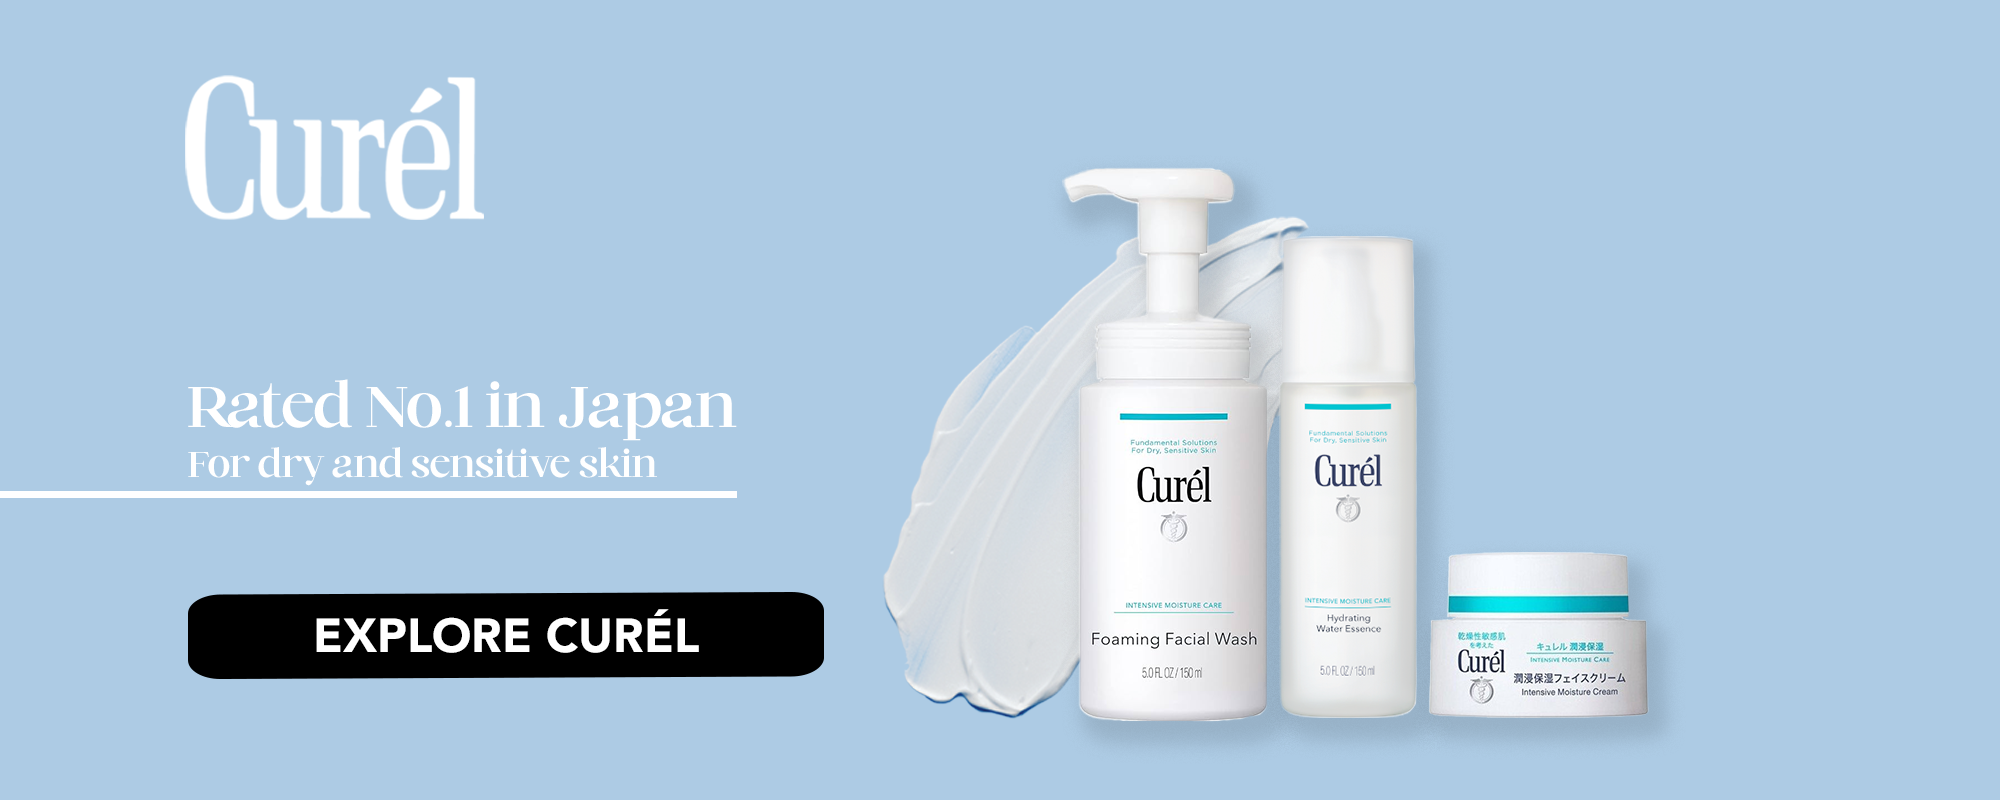 Curel: Discover Gentle yet Powerful Japanese Skincare Solutions. Explore Our Range of Dermatologist-Recommended Products Designed for Sensitive Skin. Shop Now!